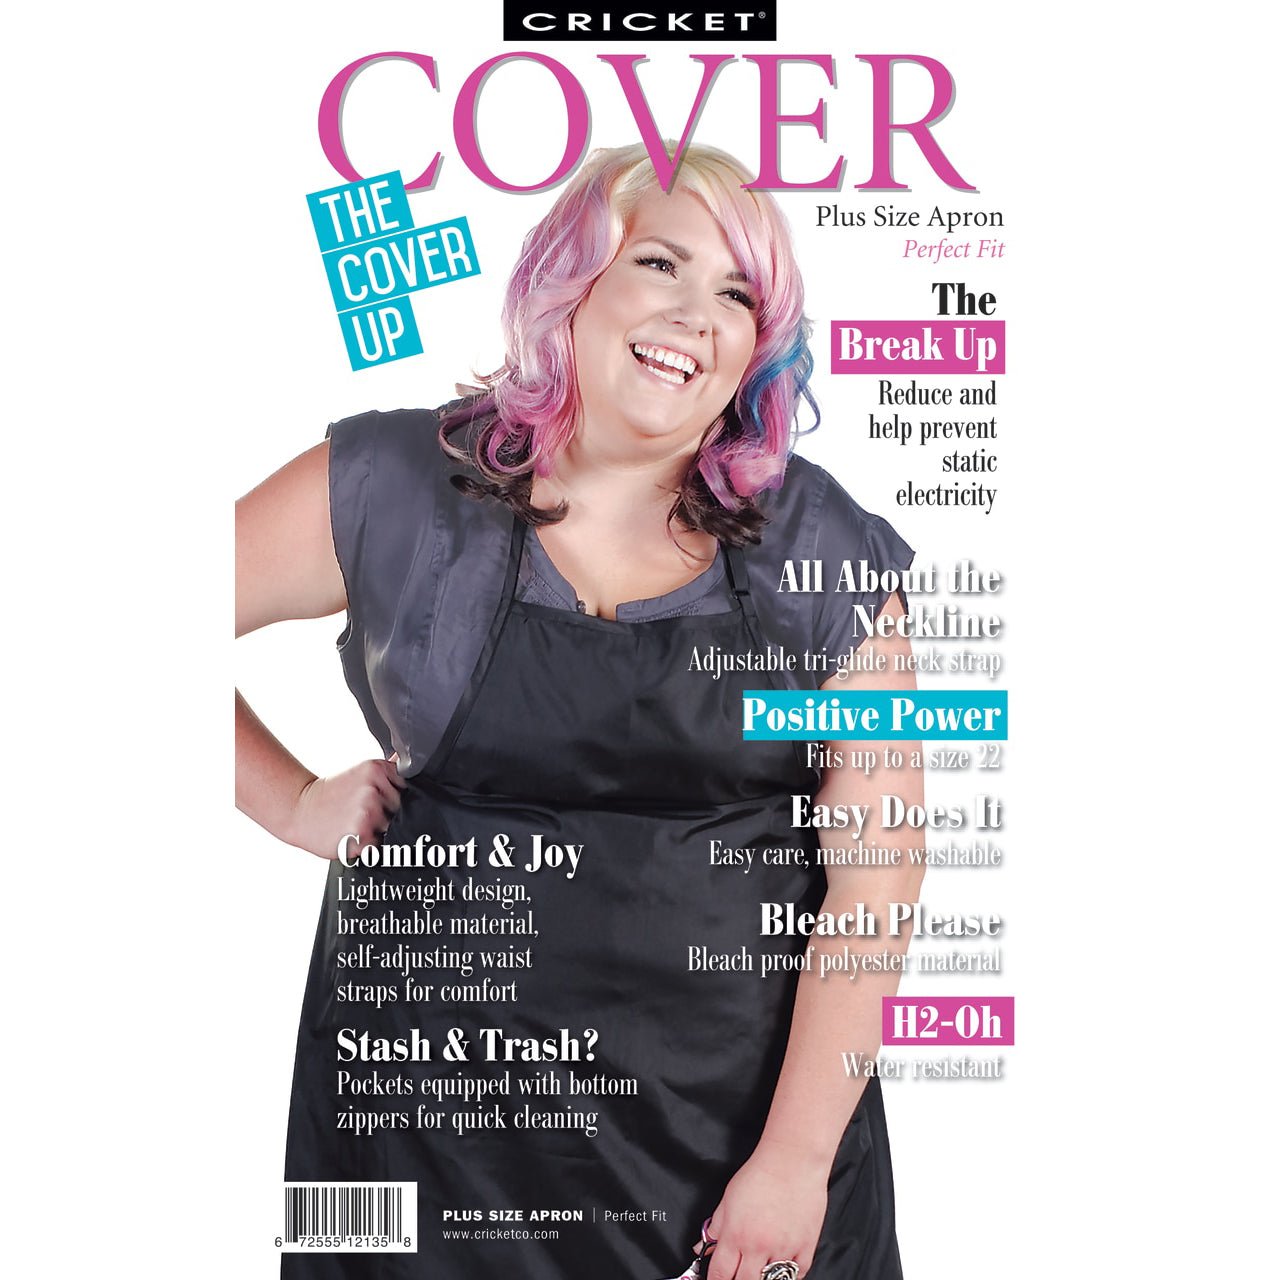 The cover Up | Plus Size Apron | Perfect Fit | CRICKET - SH Salons